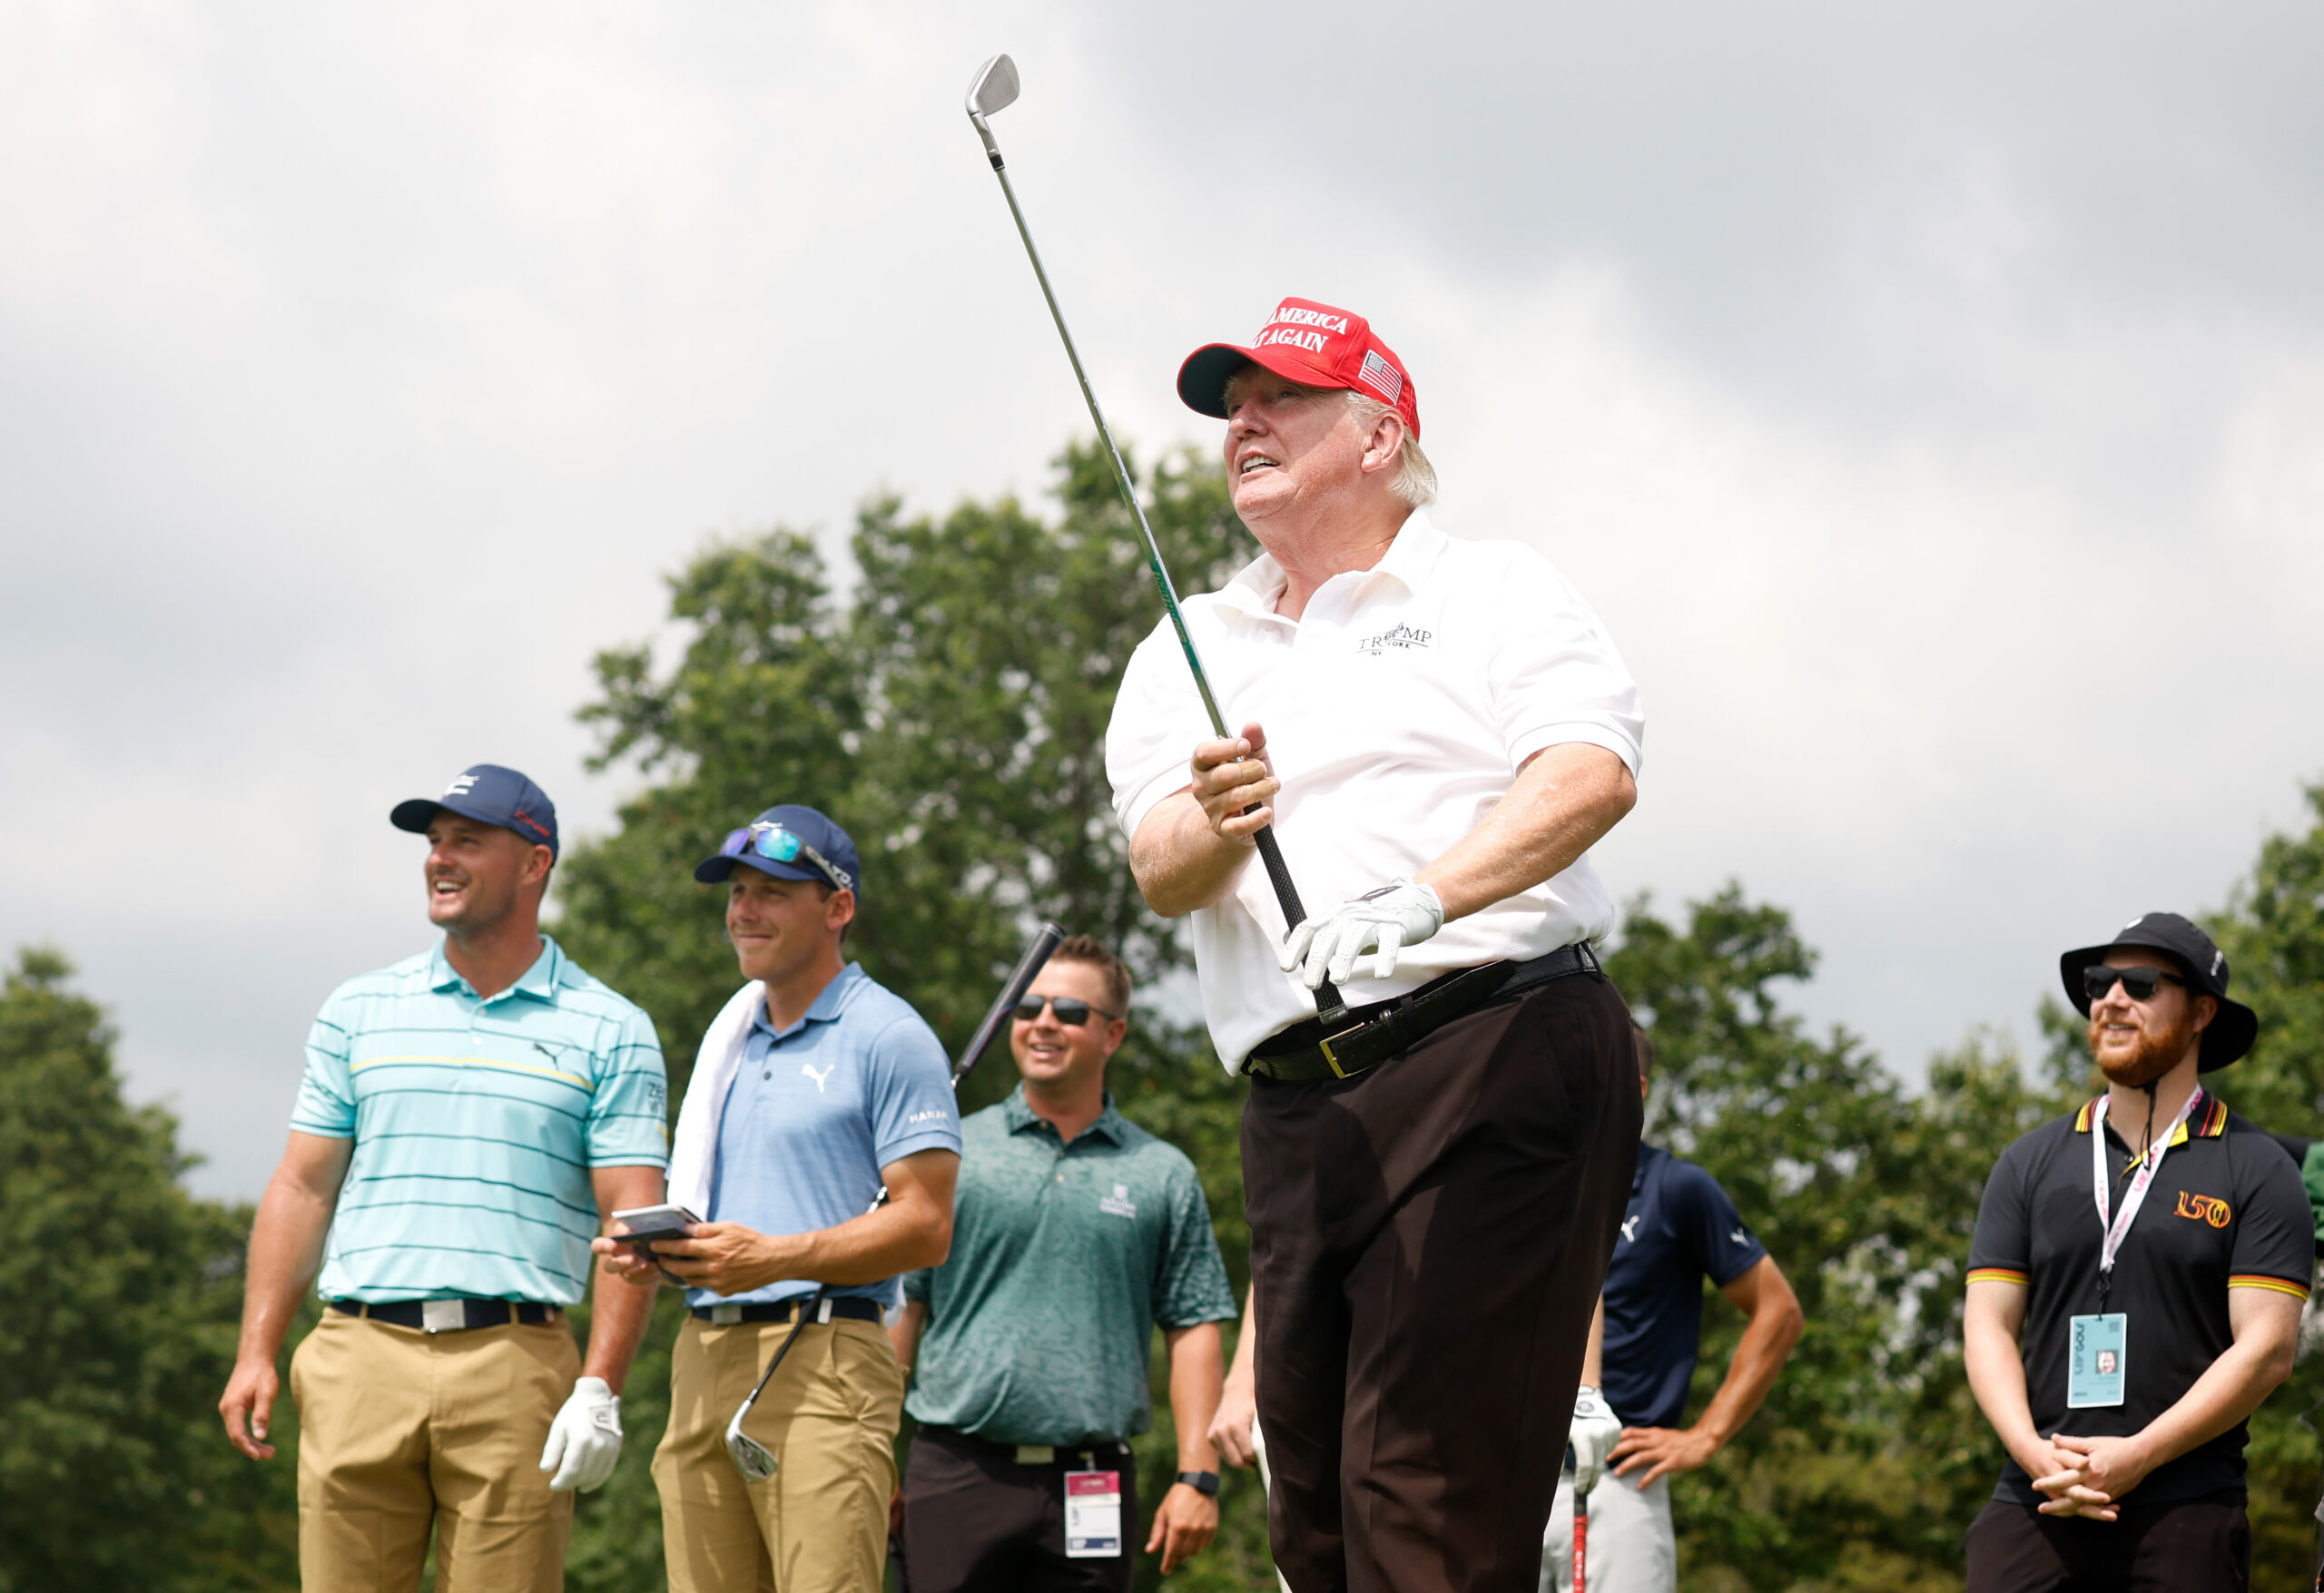 Trump Gushes About ‘Phenomenal People’ Behind Saudi-Backed LIV Golf Tour, Adds ‘We Have Human Rights Issues in This Country Too’